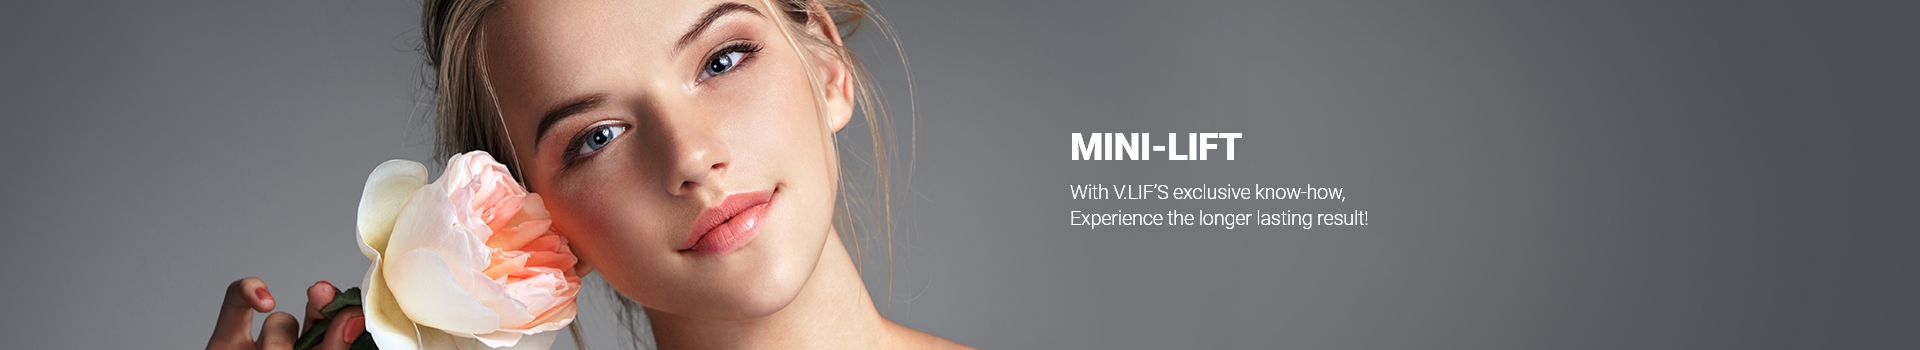 MINI-LIFT With V.LIF’S exclusive know-how, Experience the longer lasting result!